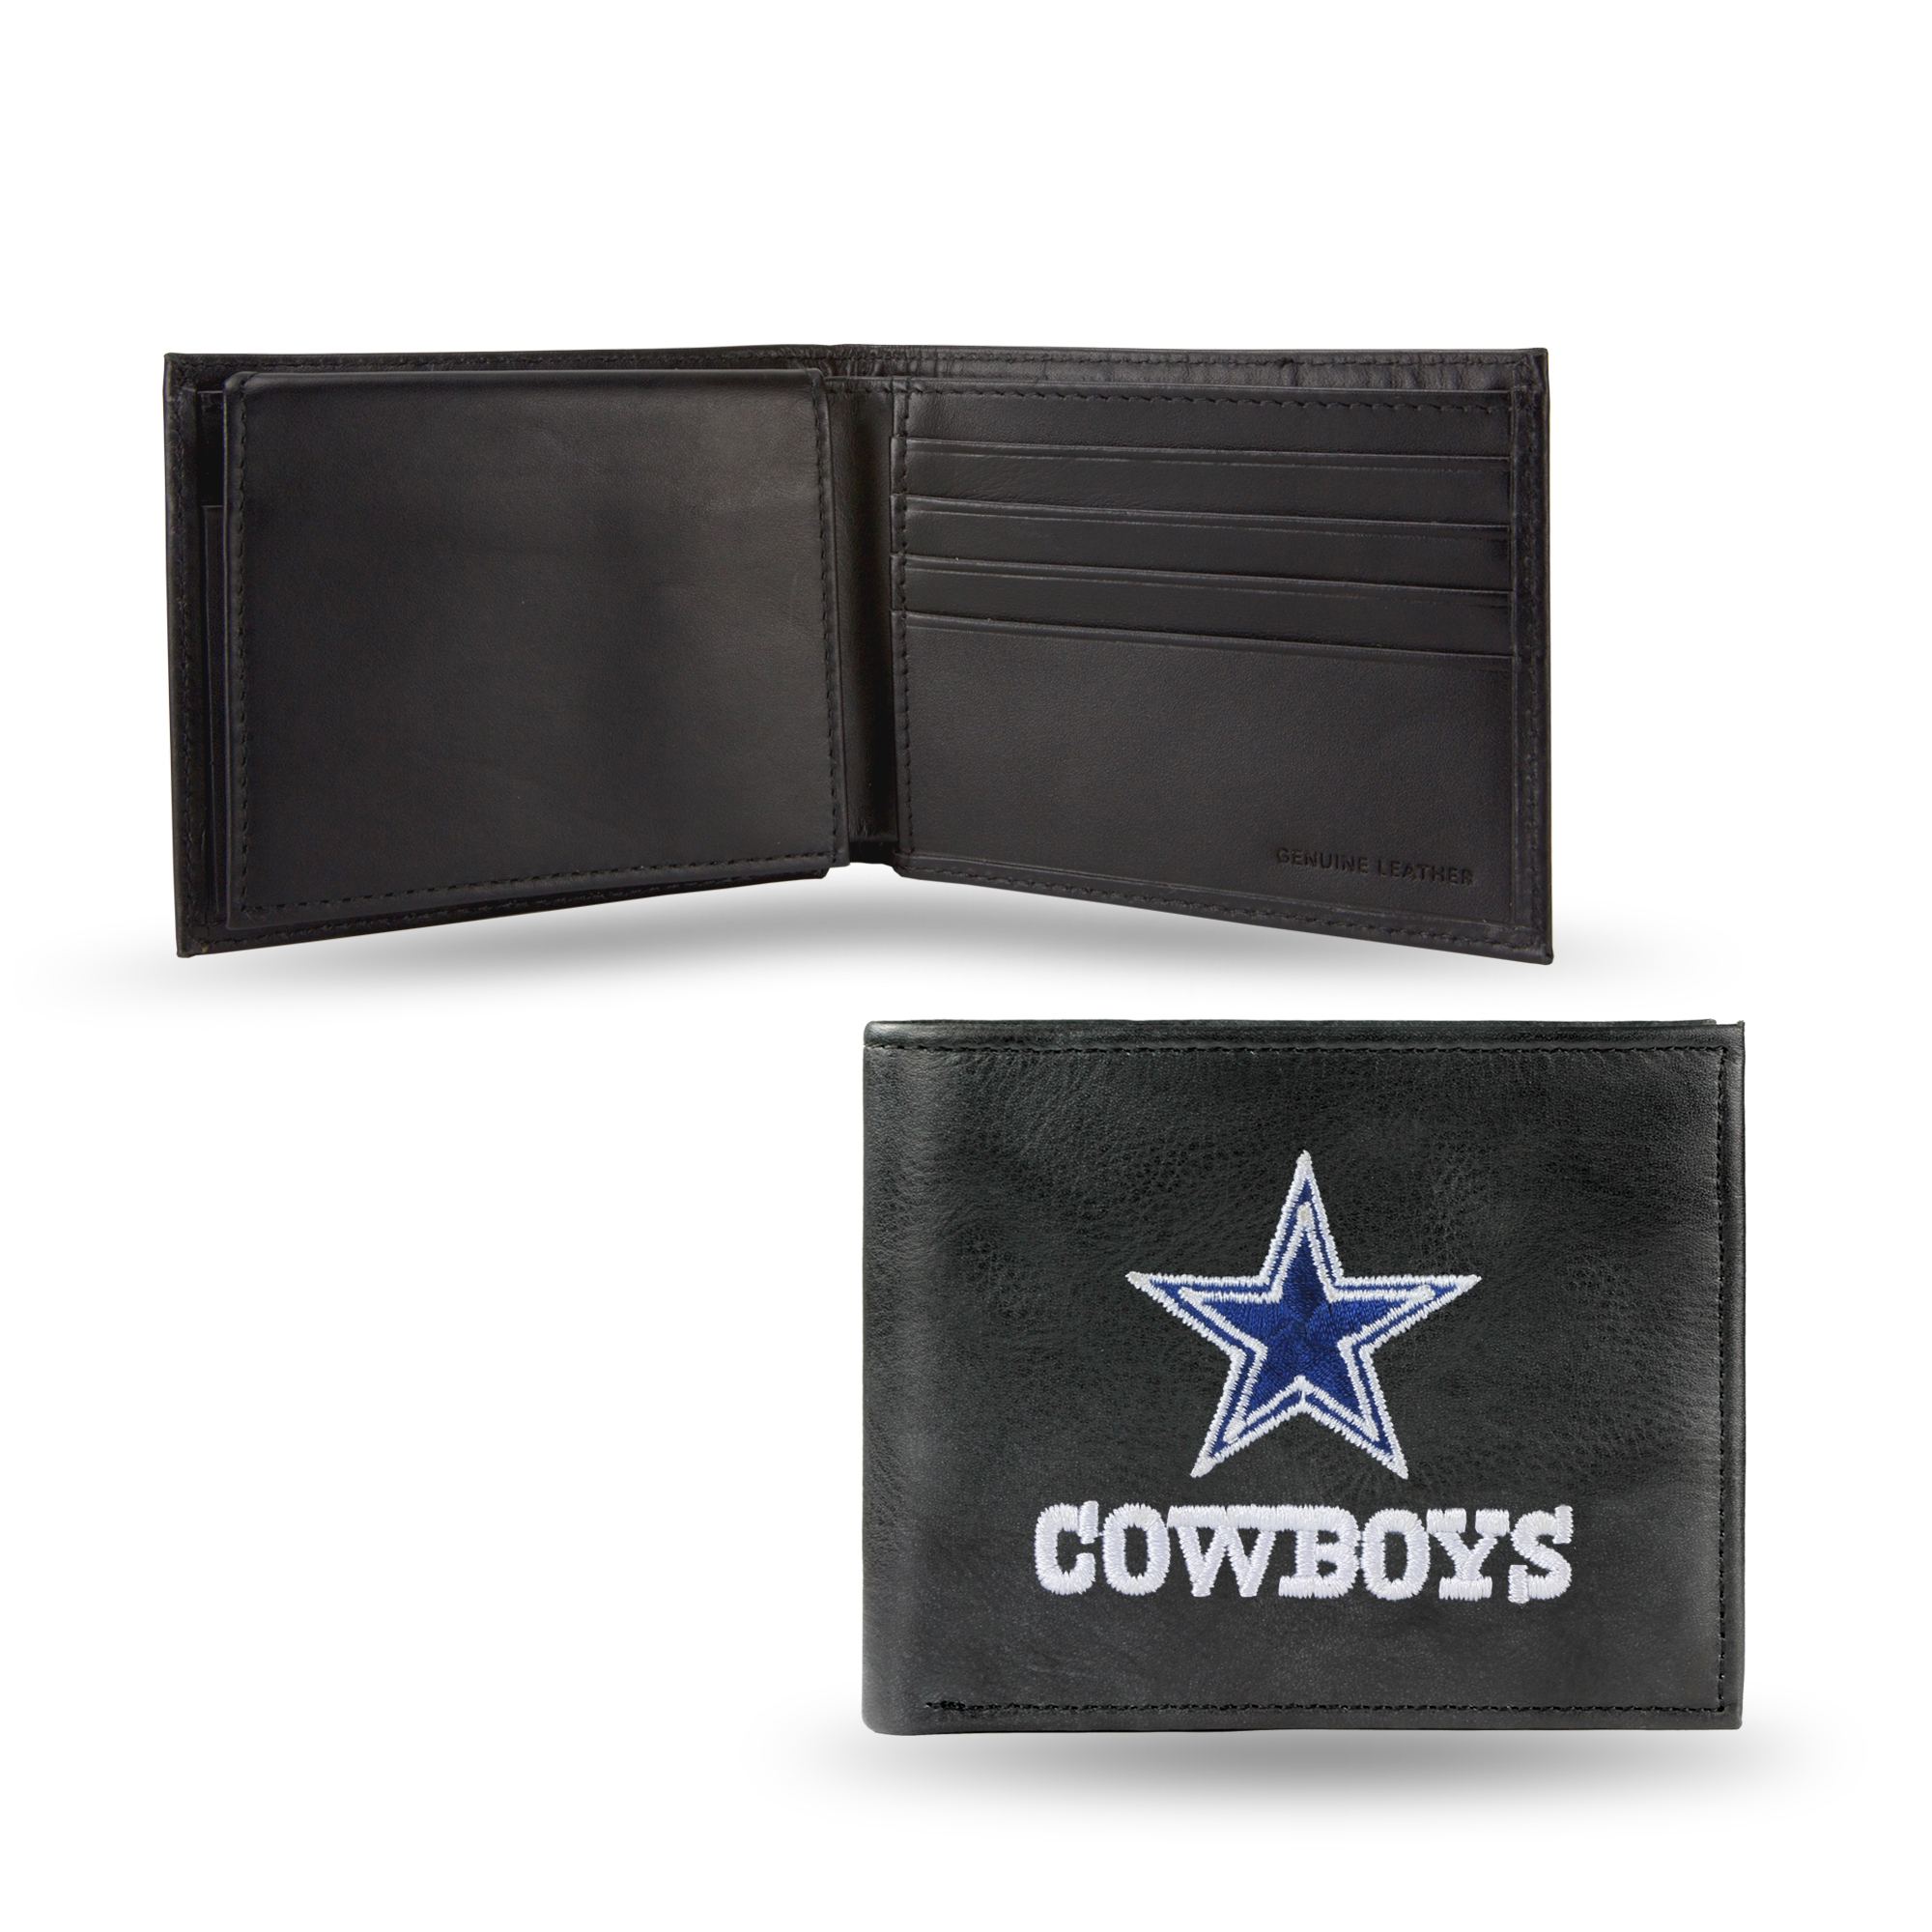 DALLAS COWBOYS EMBROIDERED BILLFOLD - image 1 of 2